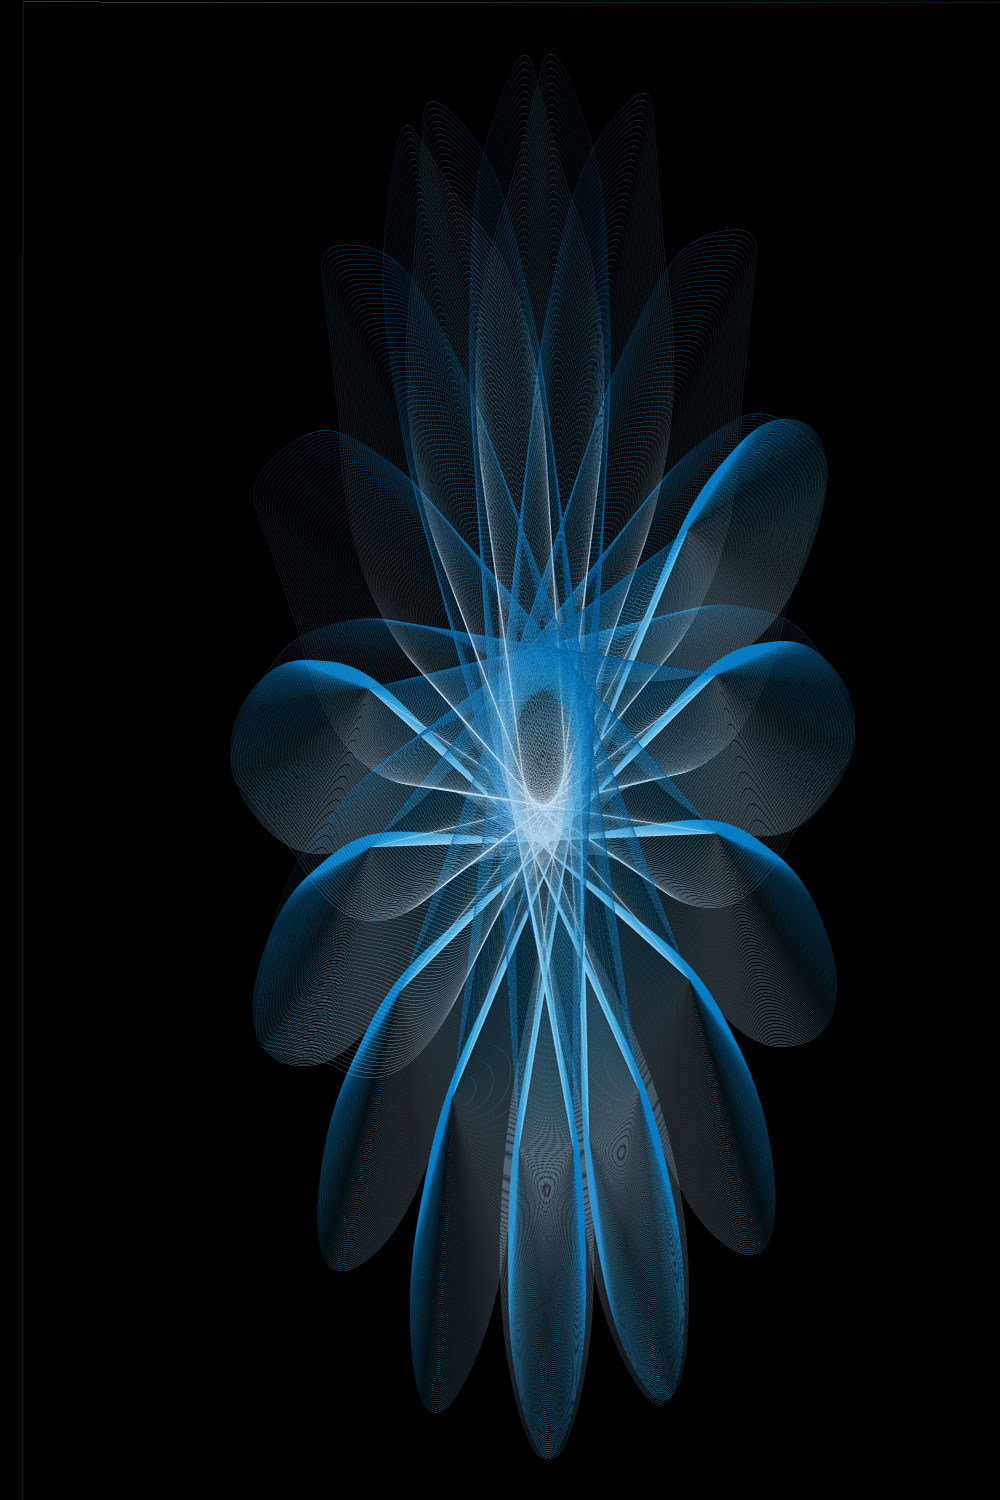 Gradient Background in blue flower with black background pinterest preview image.